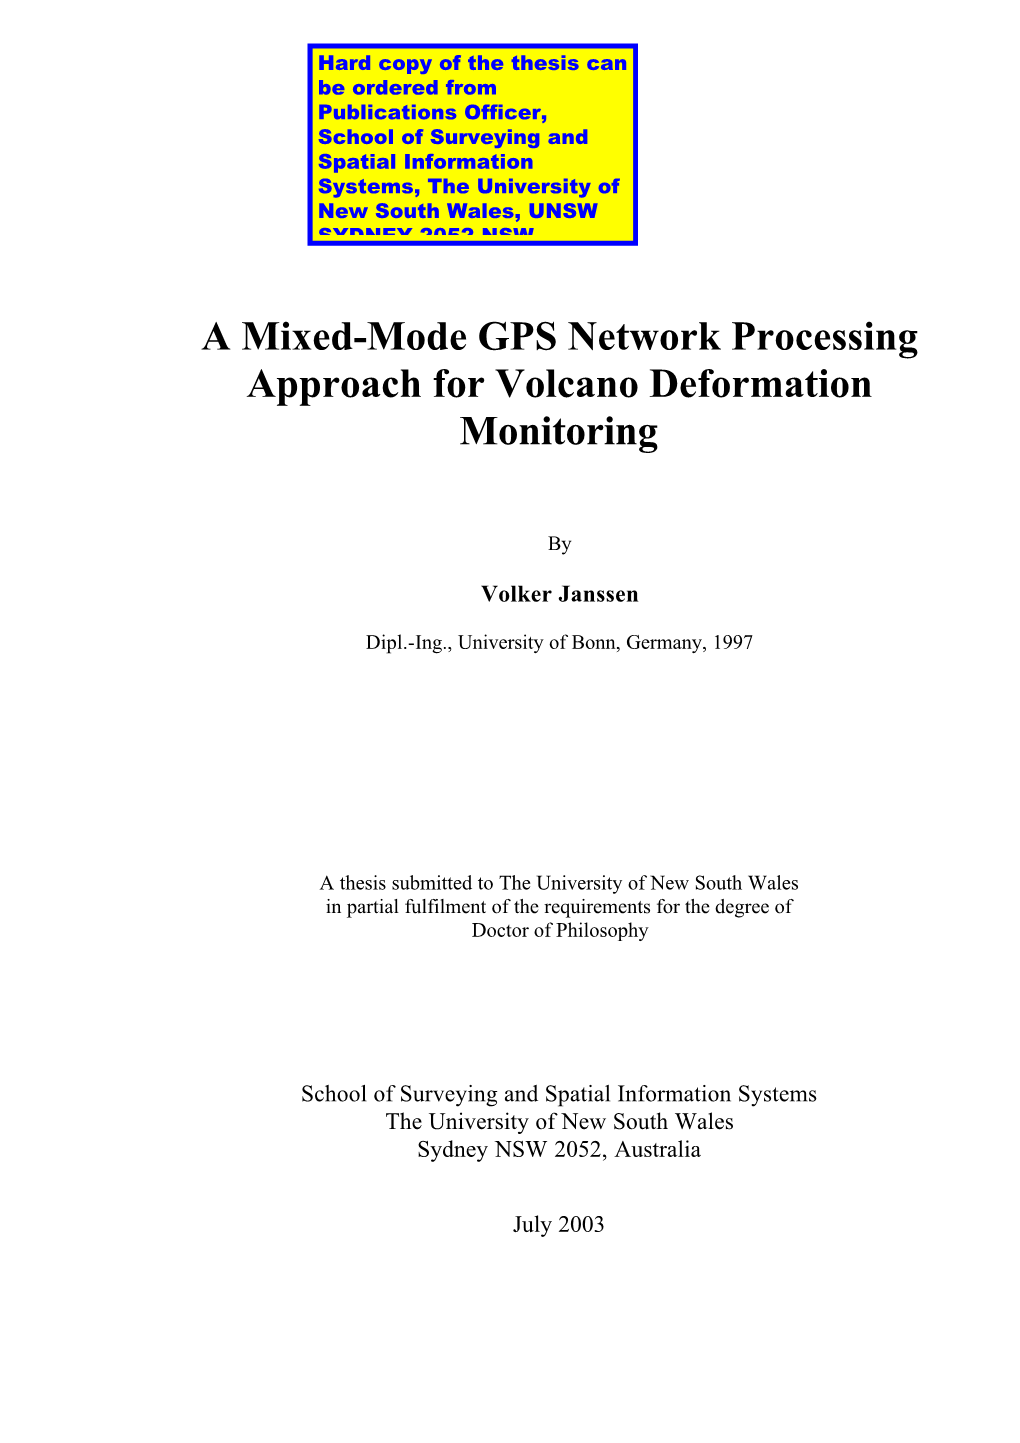 A Mixed-Mode GPS Network Processing Approach for Volcano Deformation Monitoring